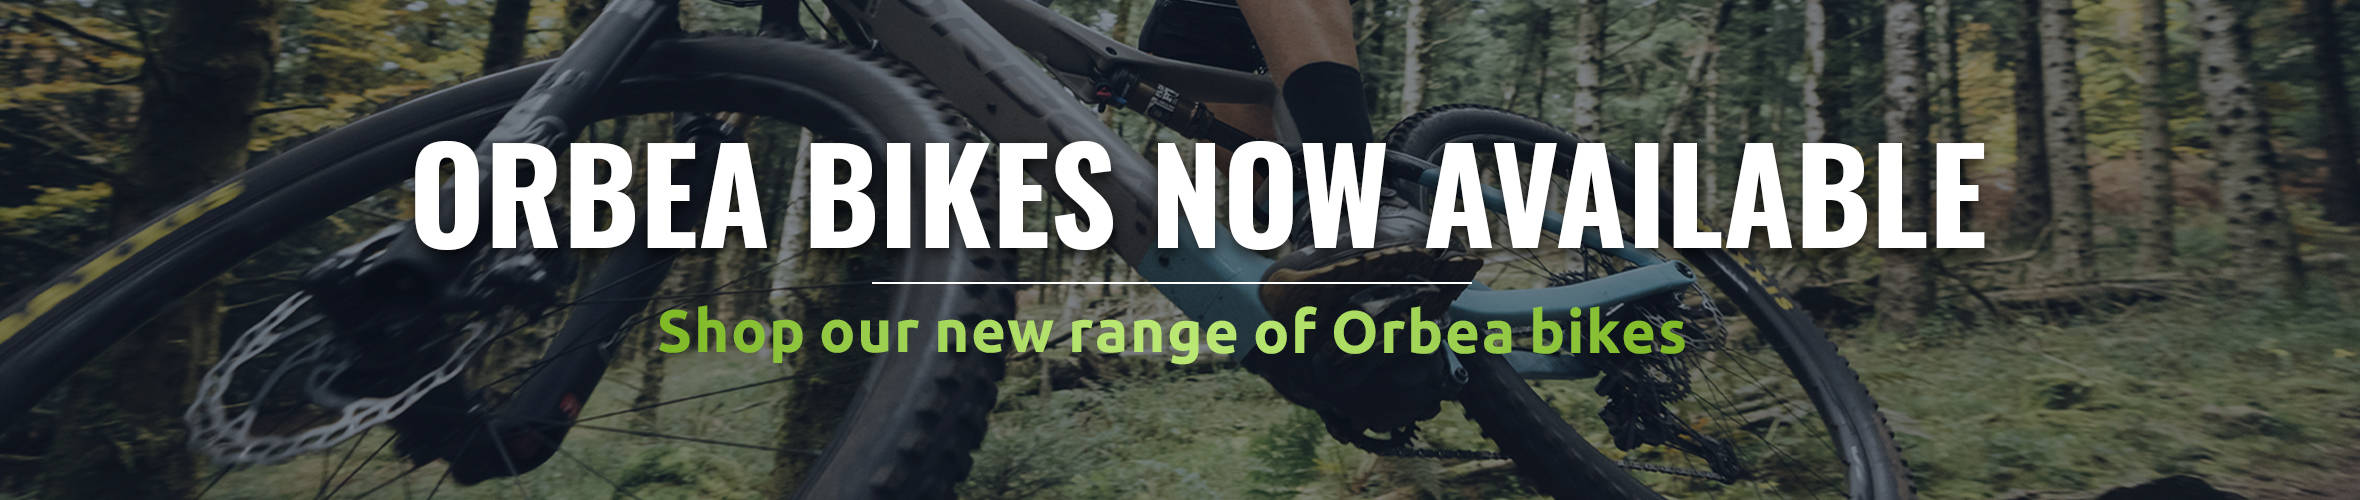 Orbea Bikes now available